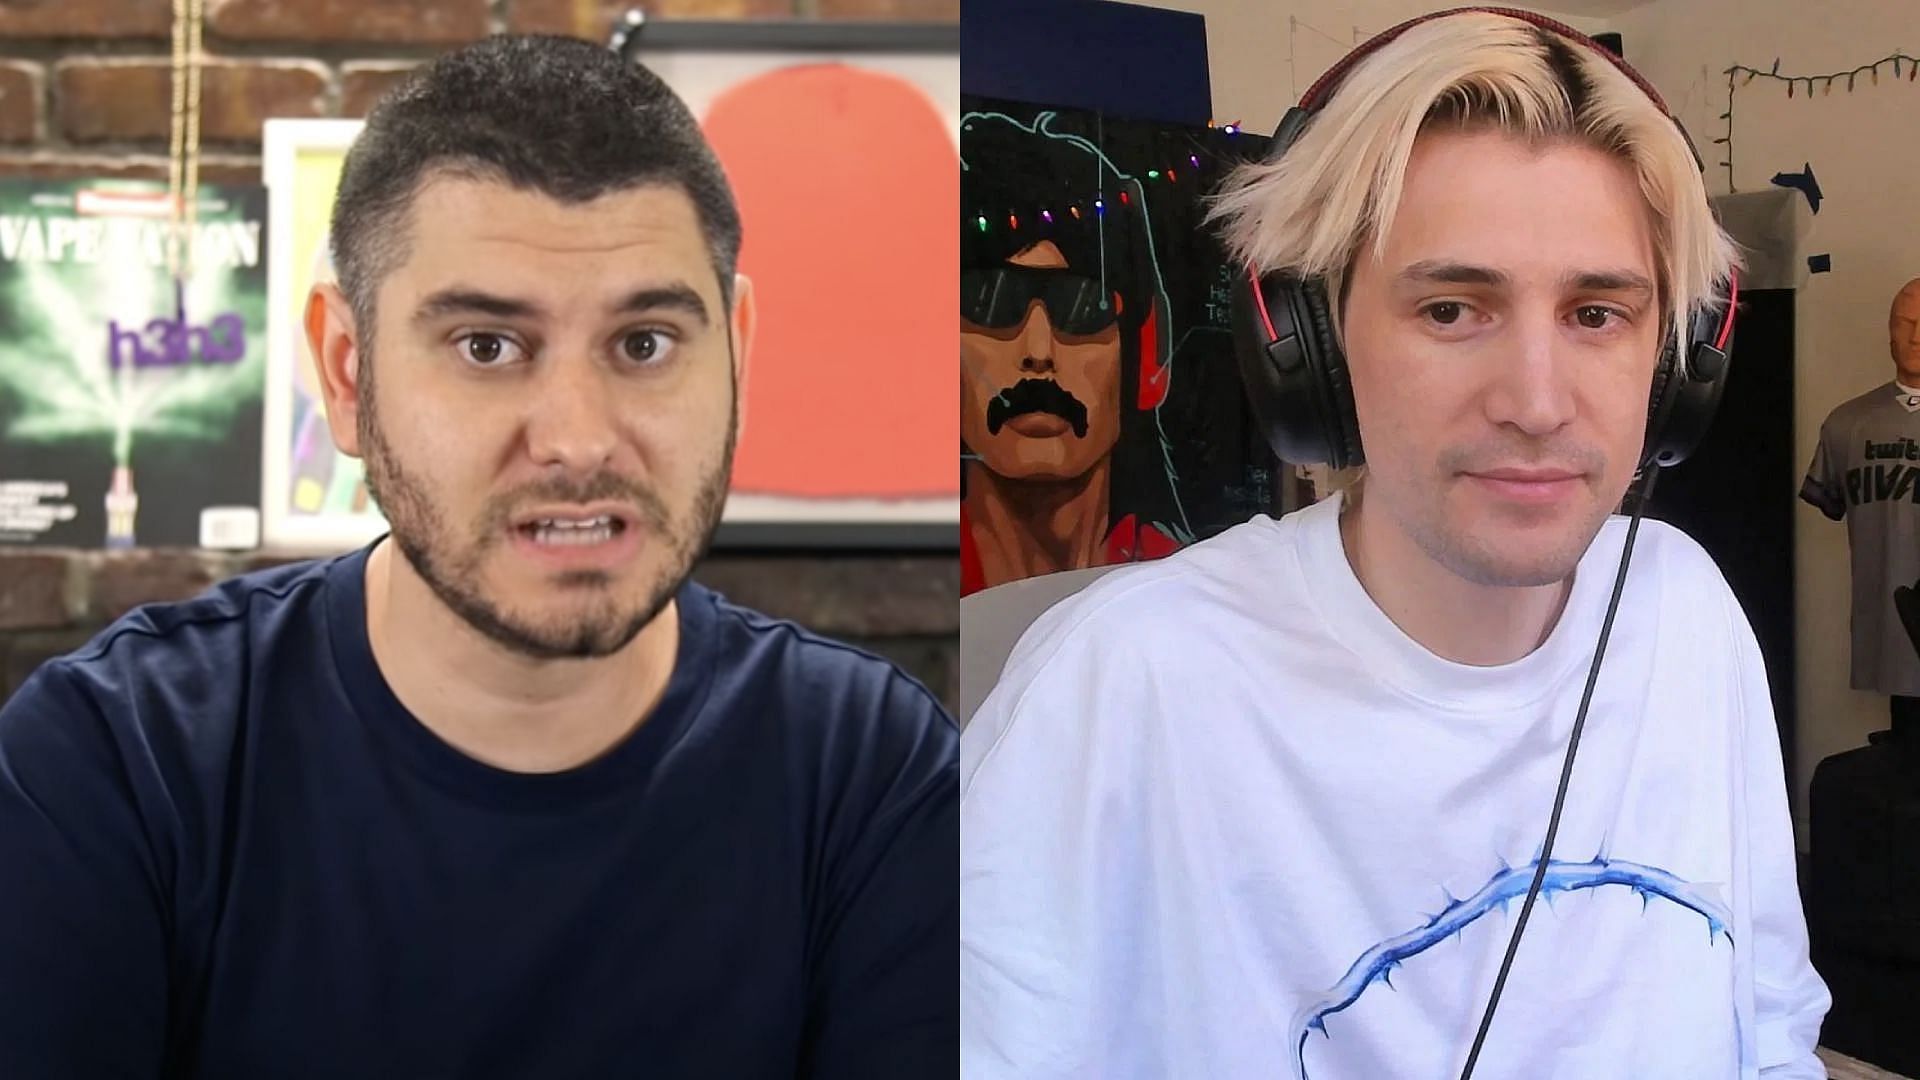 Ethan Klein ends the debate after flaming xQc for his reaction content (Image via Sportskeeda)